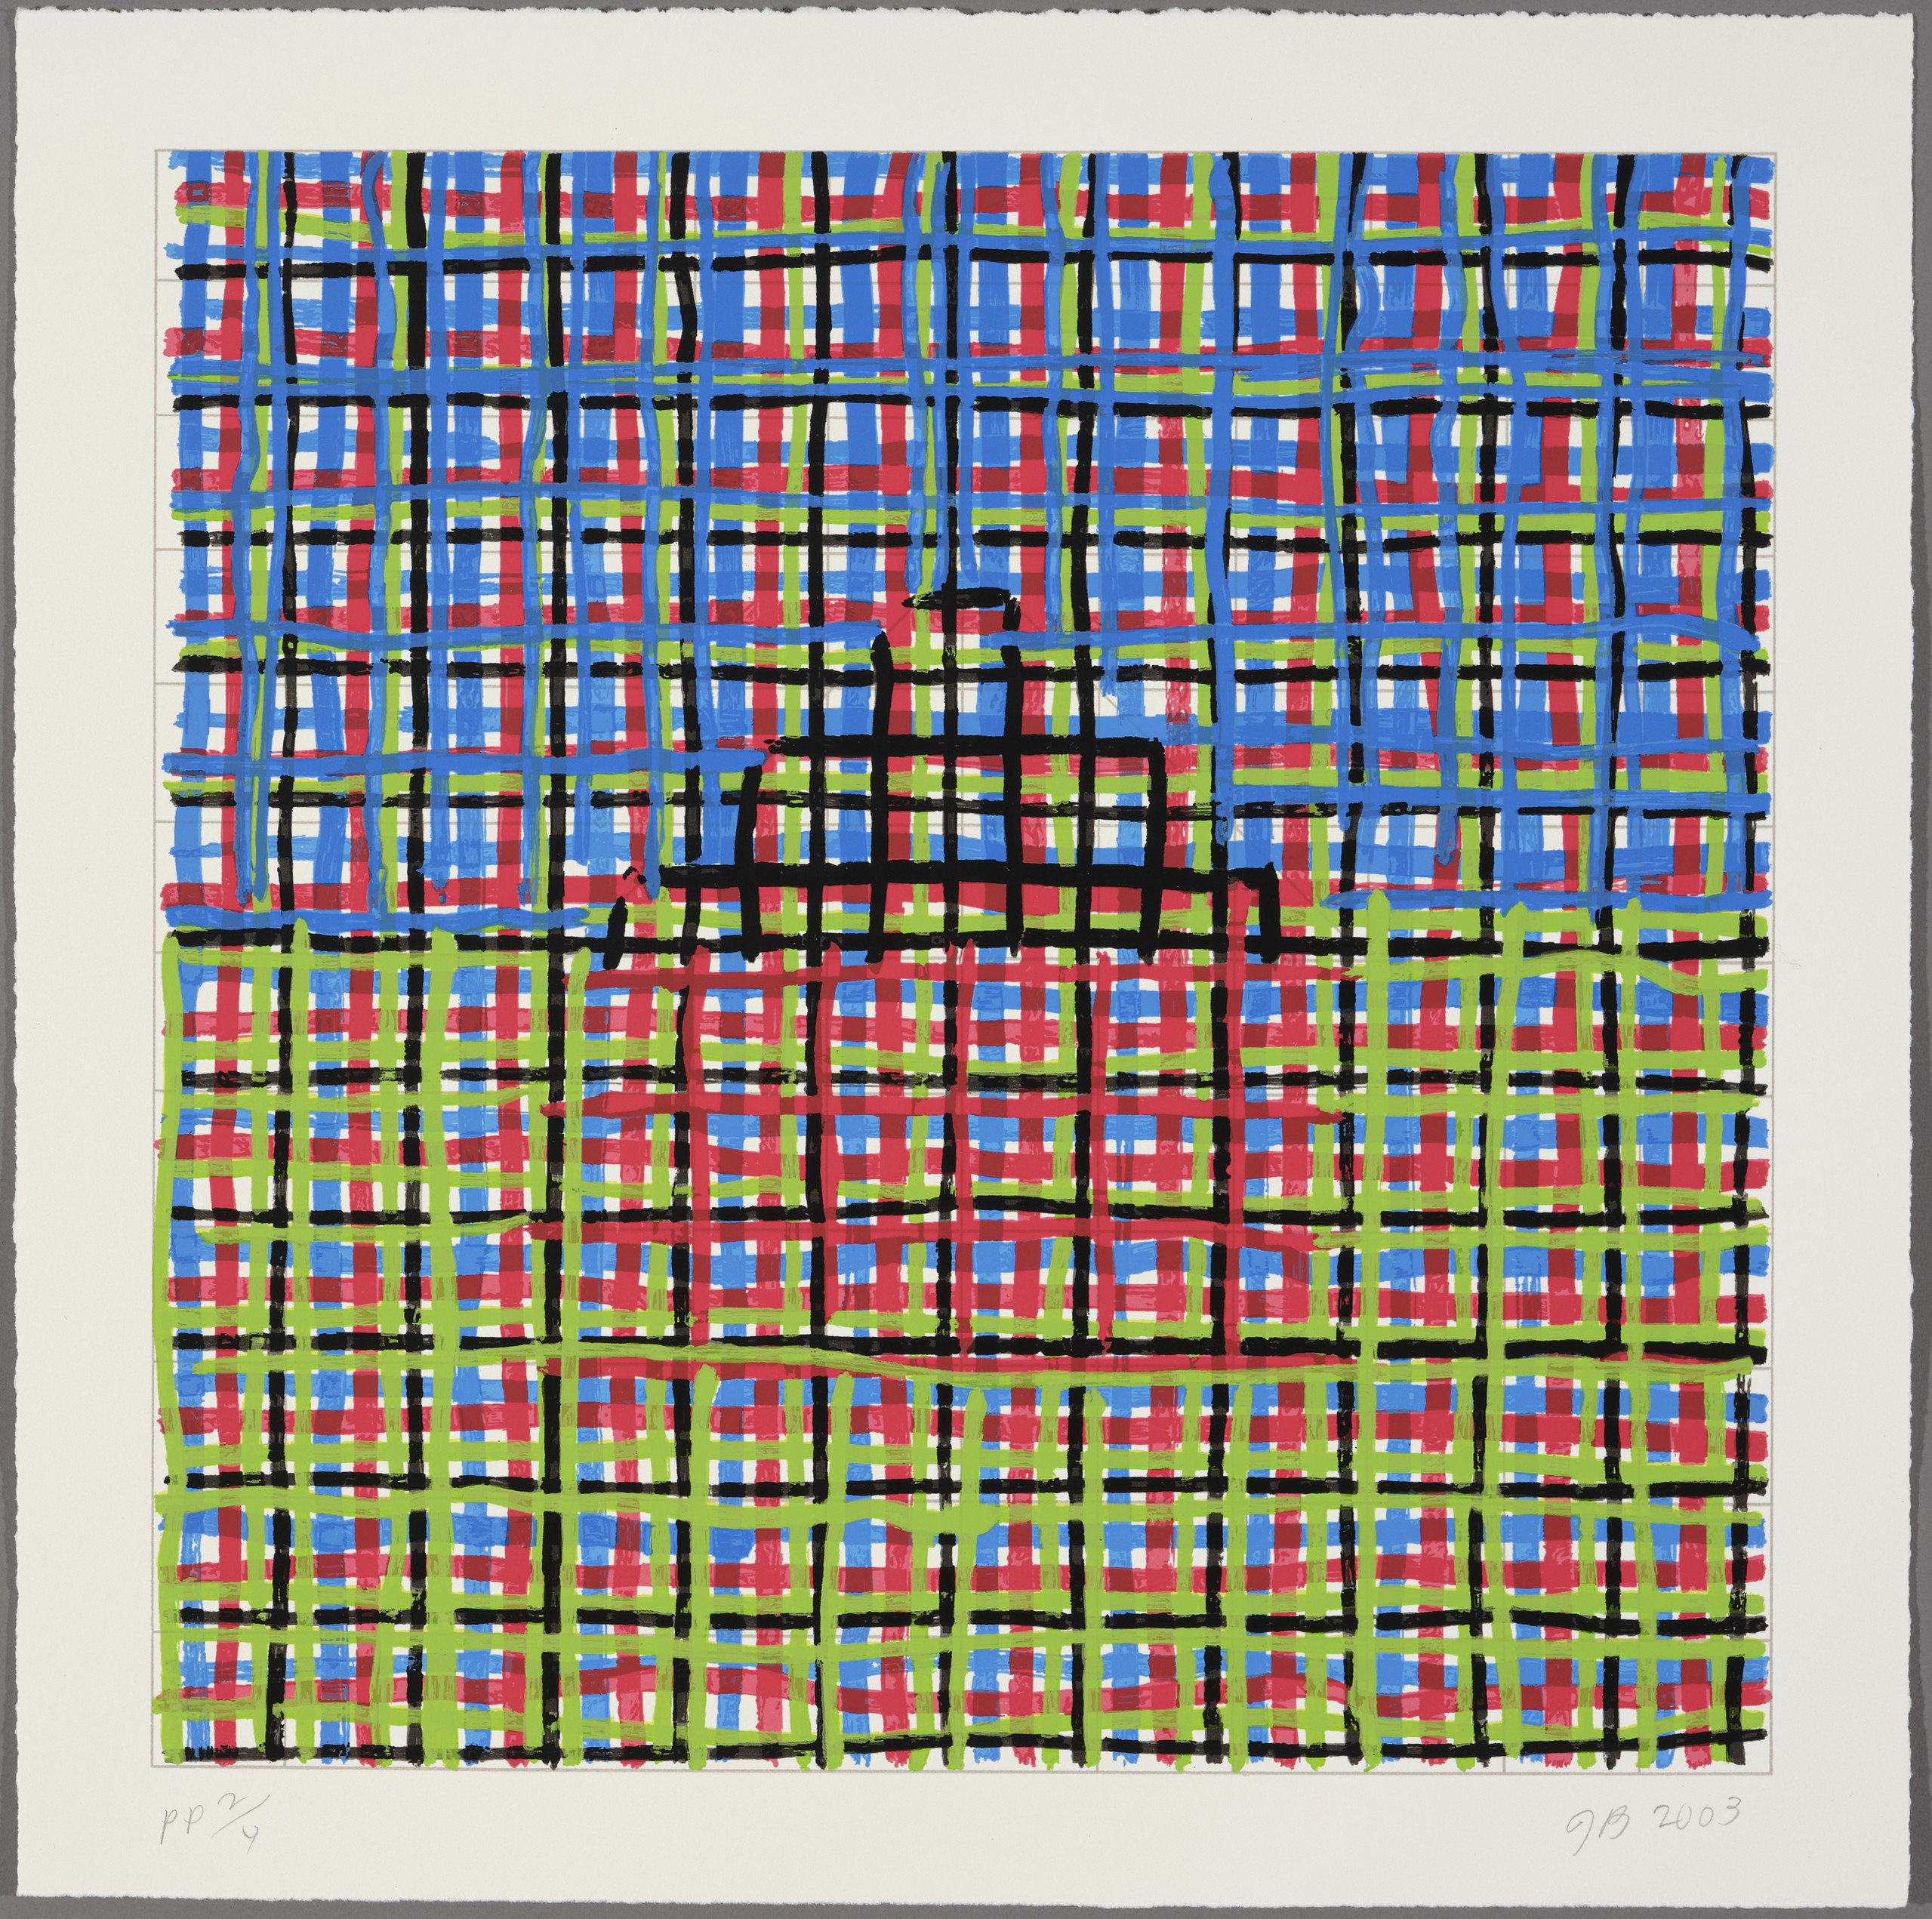 The image of a simple house, with red wall, black roof, green ground, and blue sky, is rendered in loose, artistic lines forming a grid in each of these primary colors. The lines intersect in a basketweave style, revealing and hiding the house.